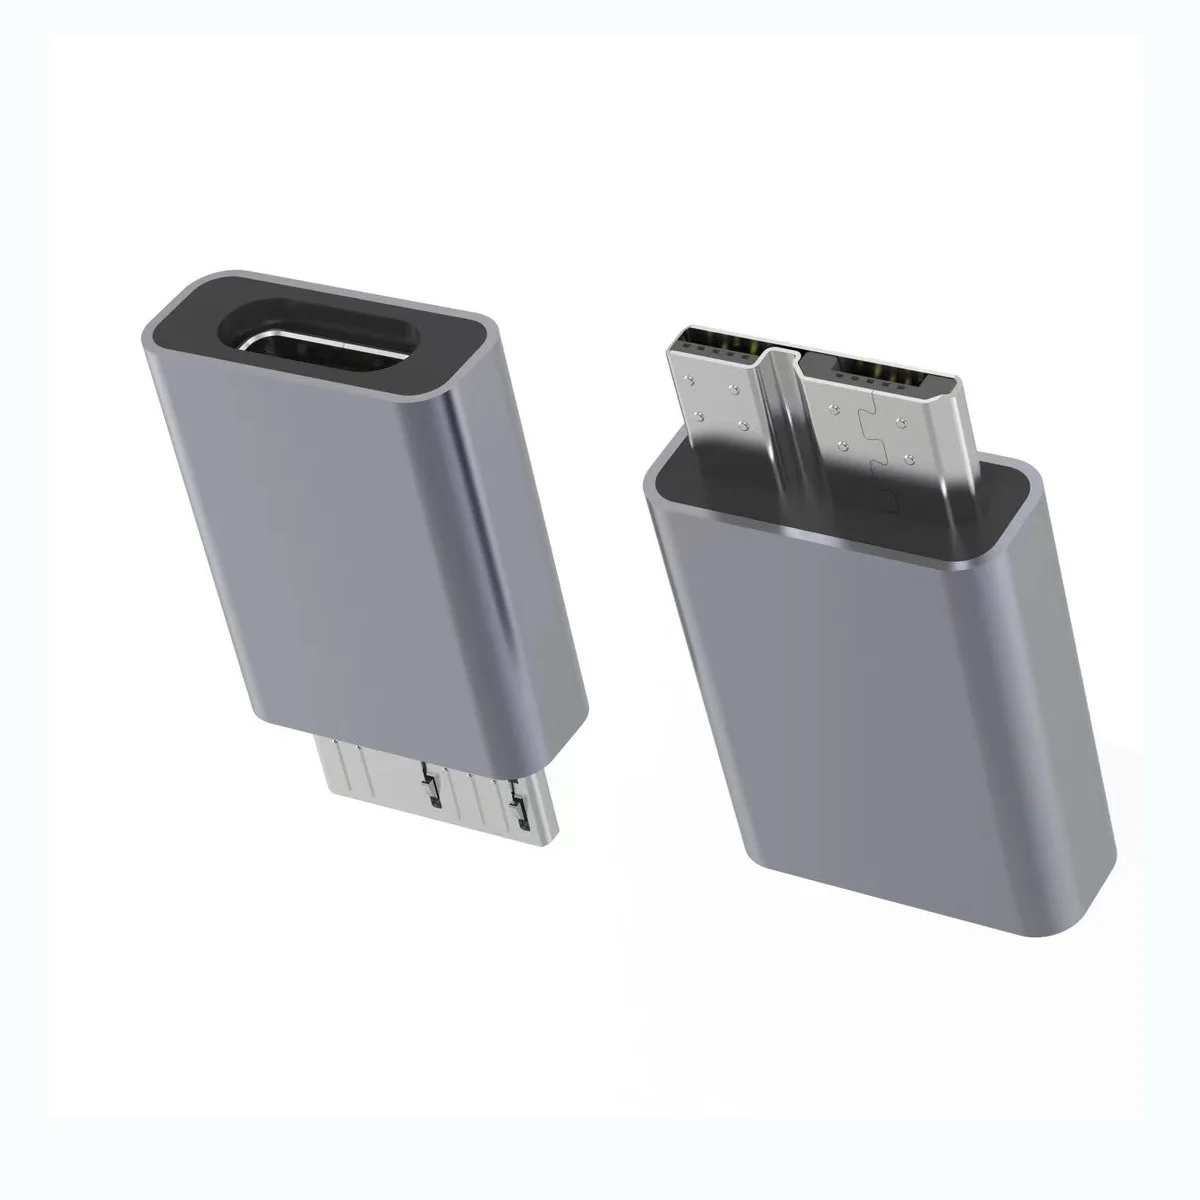 

USB Adapter Type C Female to USB 3.0 Micro B Male connector For Galaxy S5 Note 3 Seagate Toshiba External Hard Drive Camera